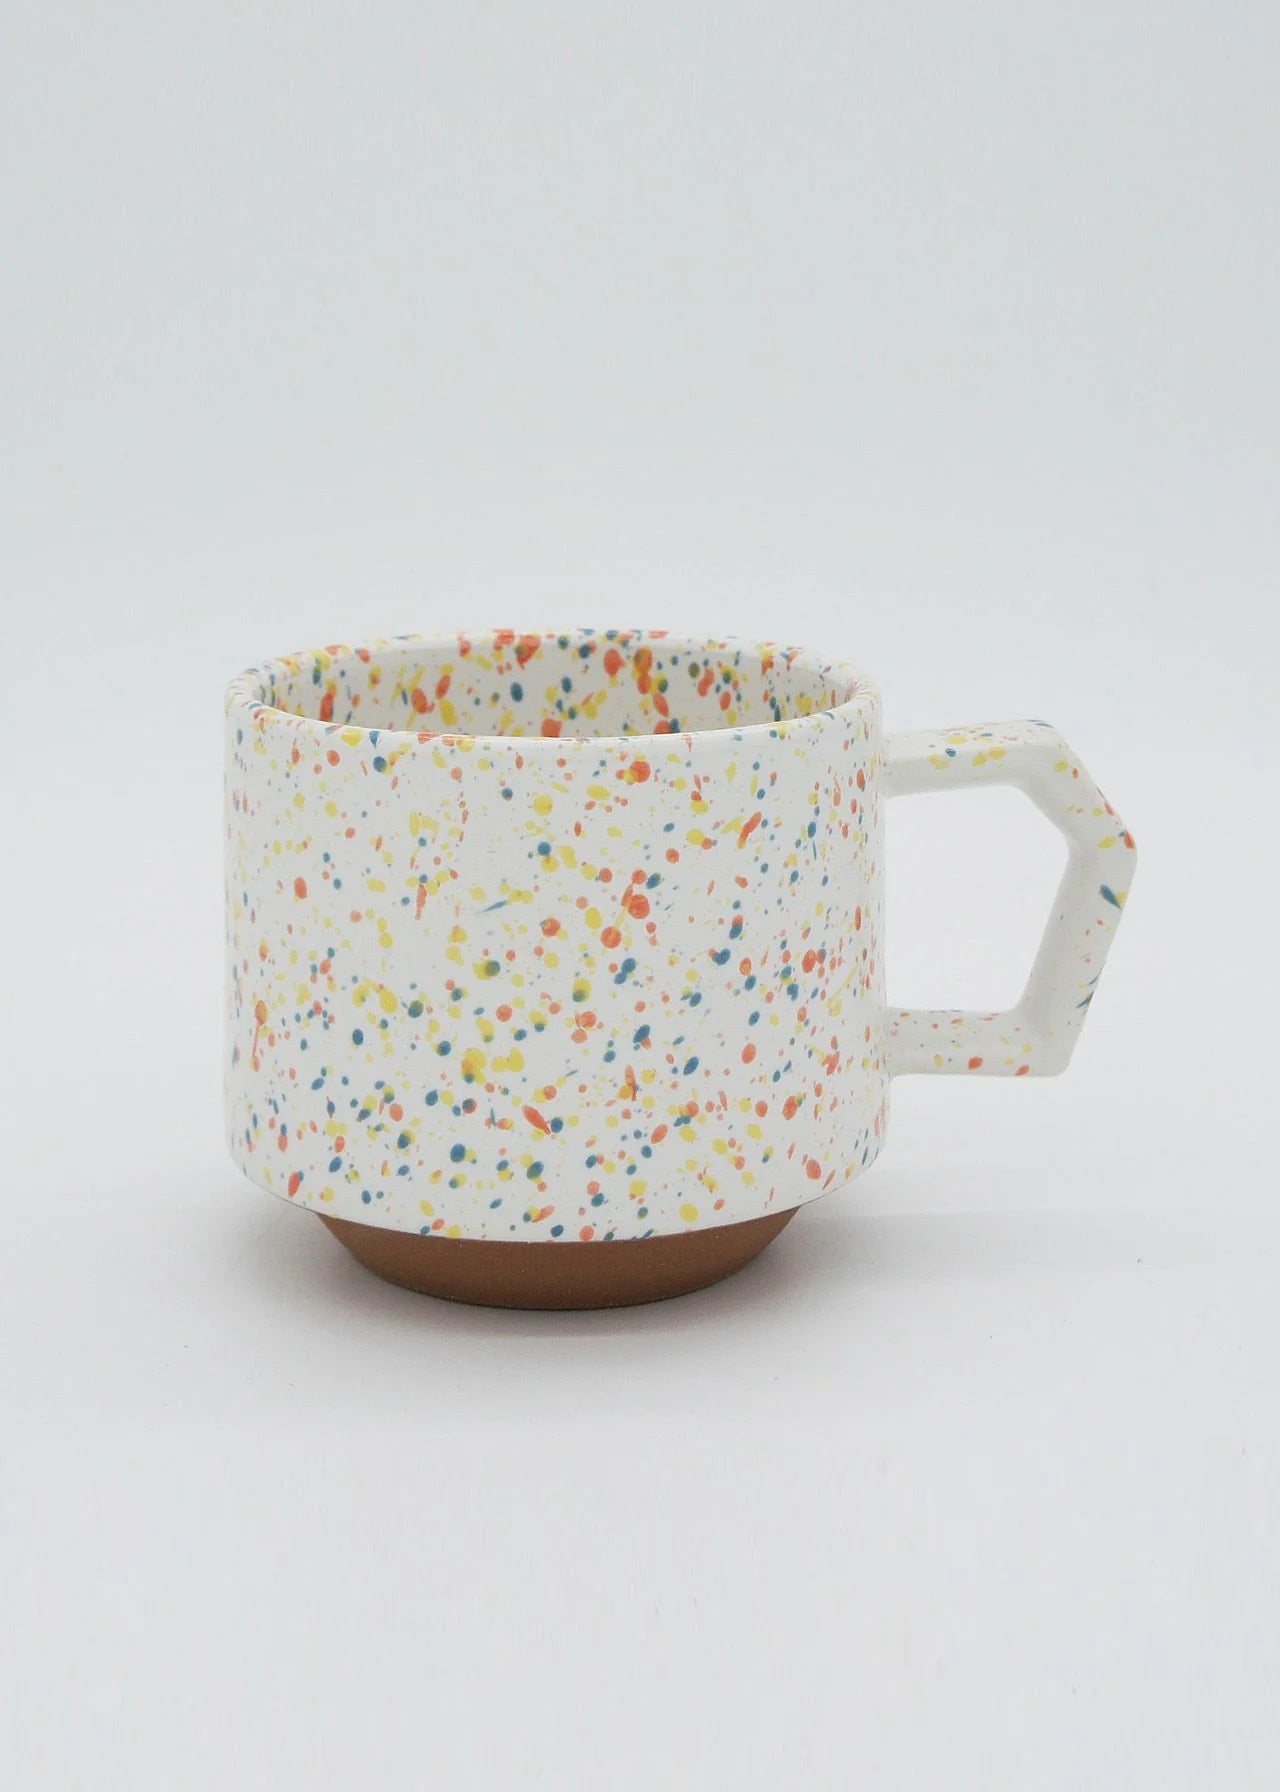 A Stacking Mug - Speckled White with multi colored speckles on it, made by CHIPS Inc.